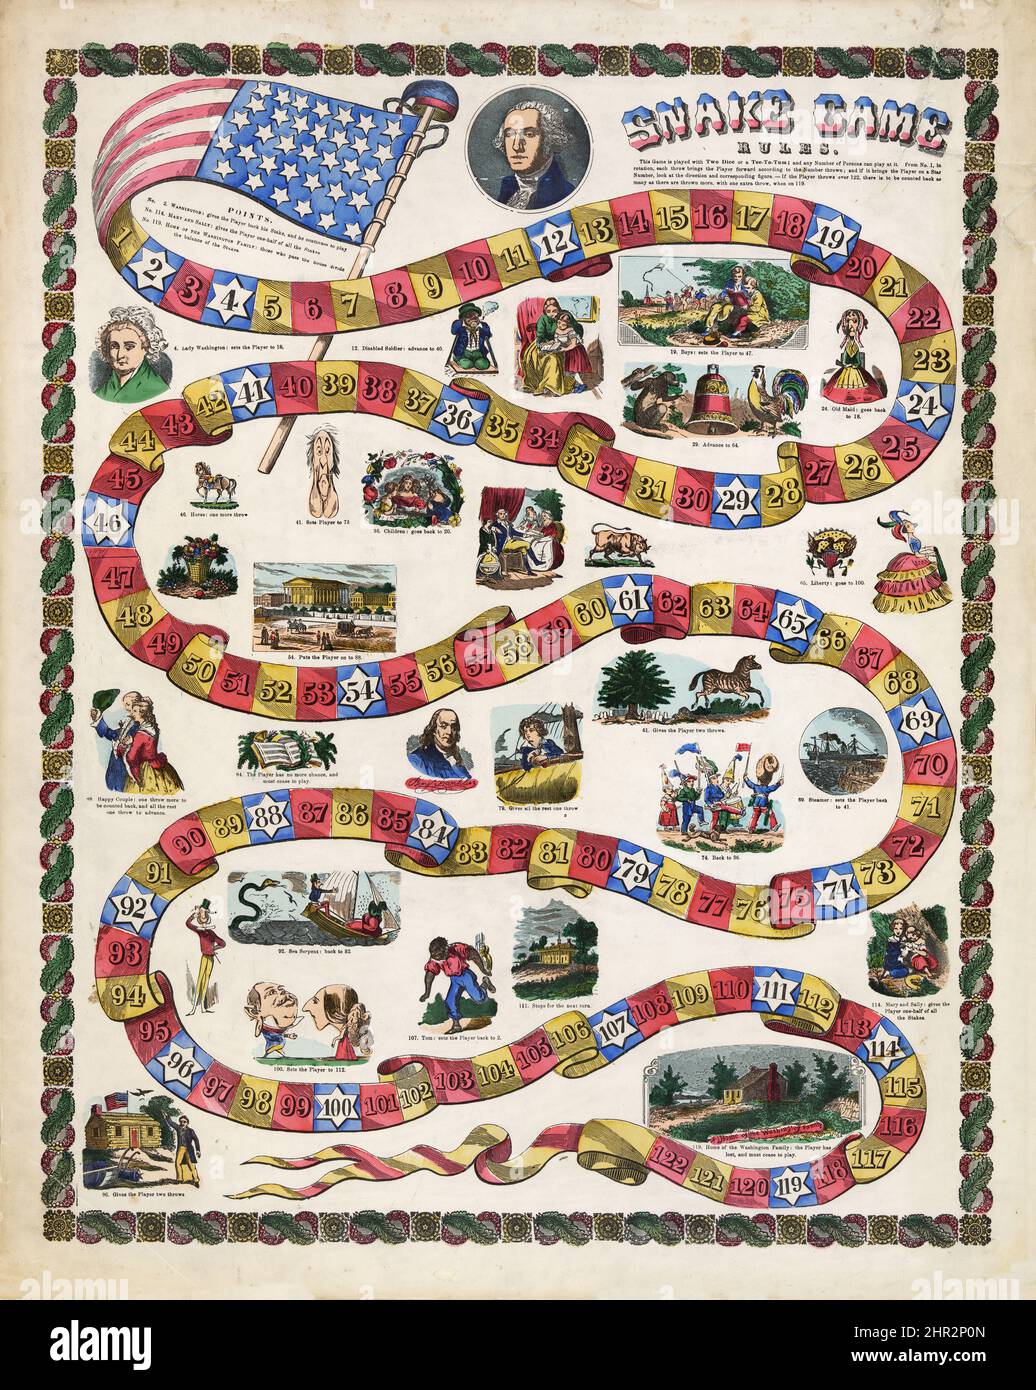 Snake Game feat. George Washington. Board game, between 1840 and 1860. Wood engravings--Hand-colored. Stock Photo